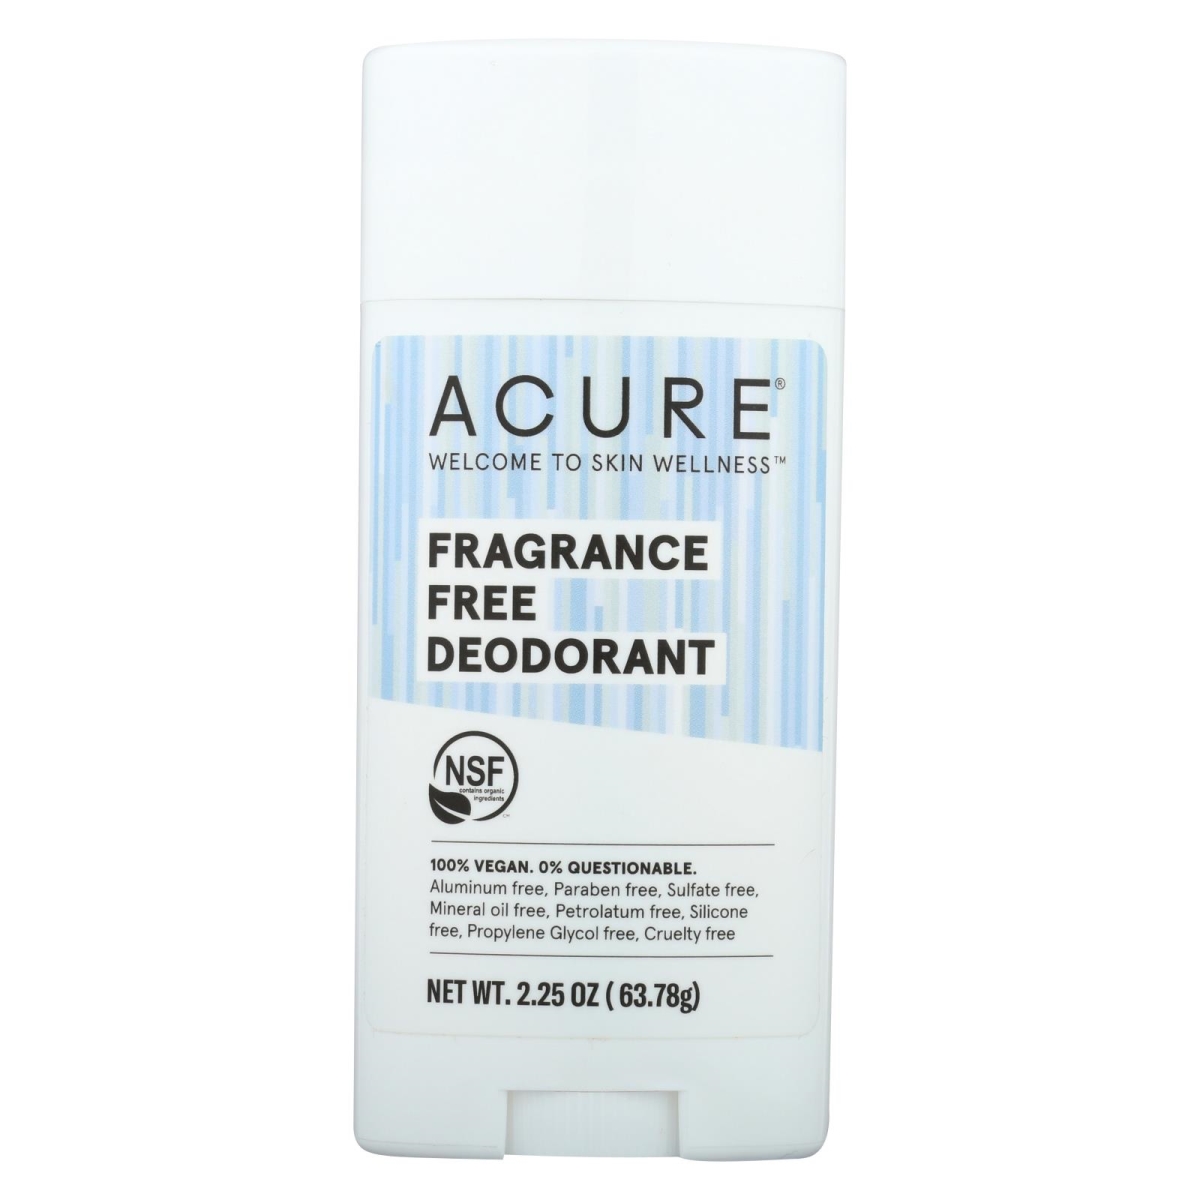 Picture of Acure 2328276 2.25 oz Fragrance Free Deodorant